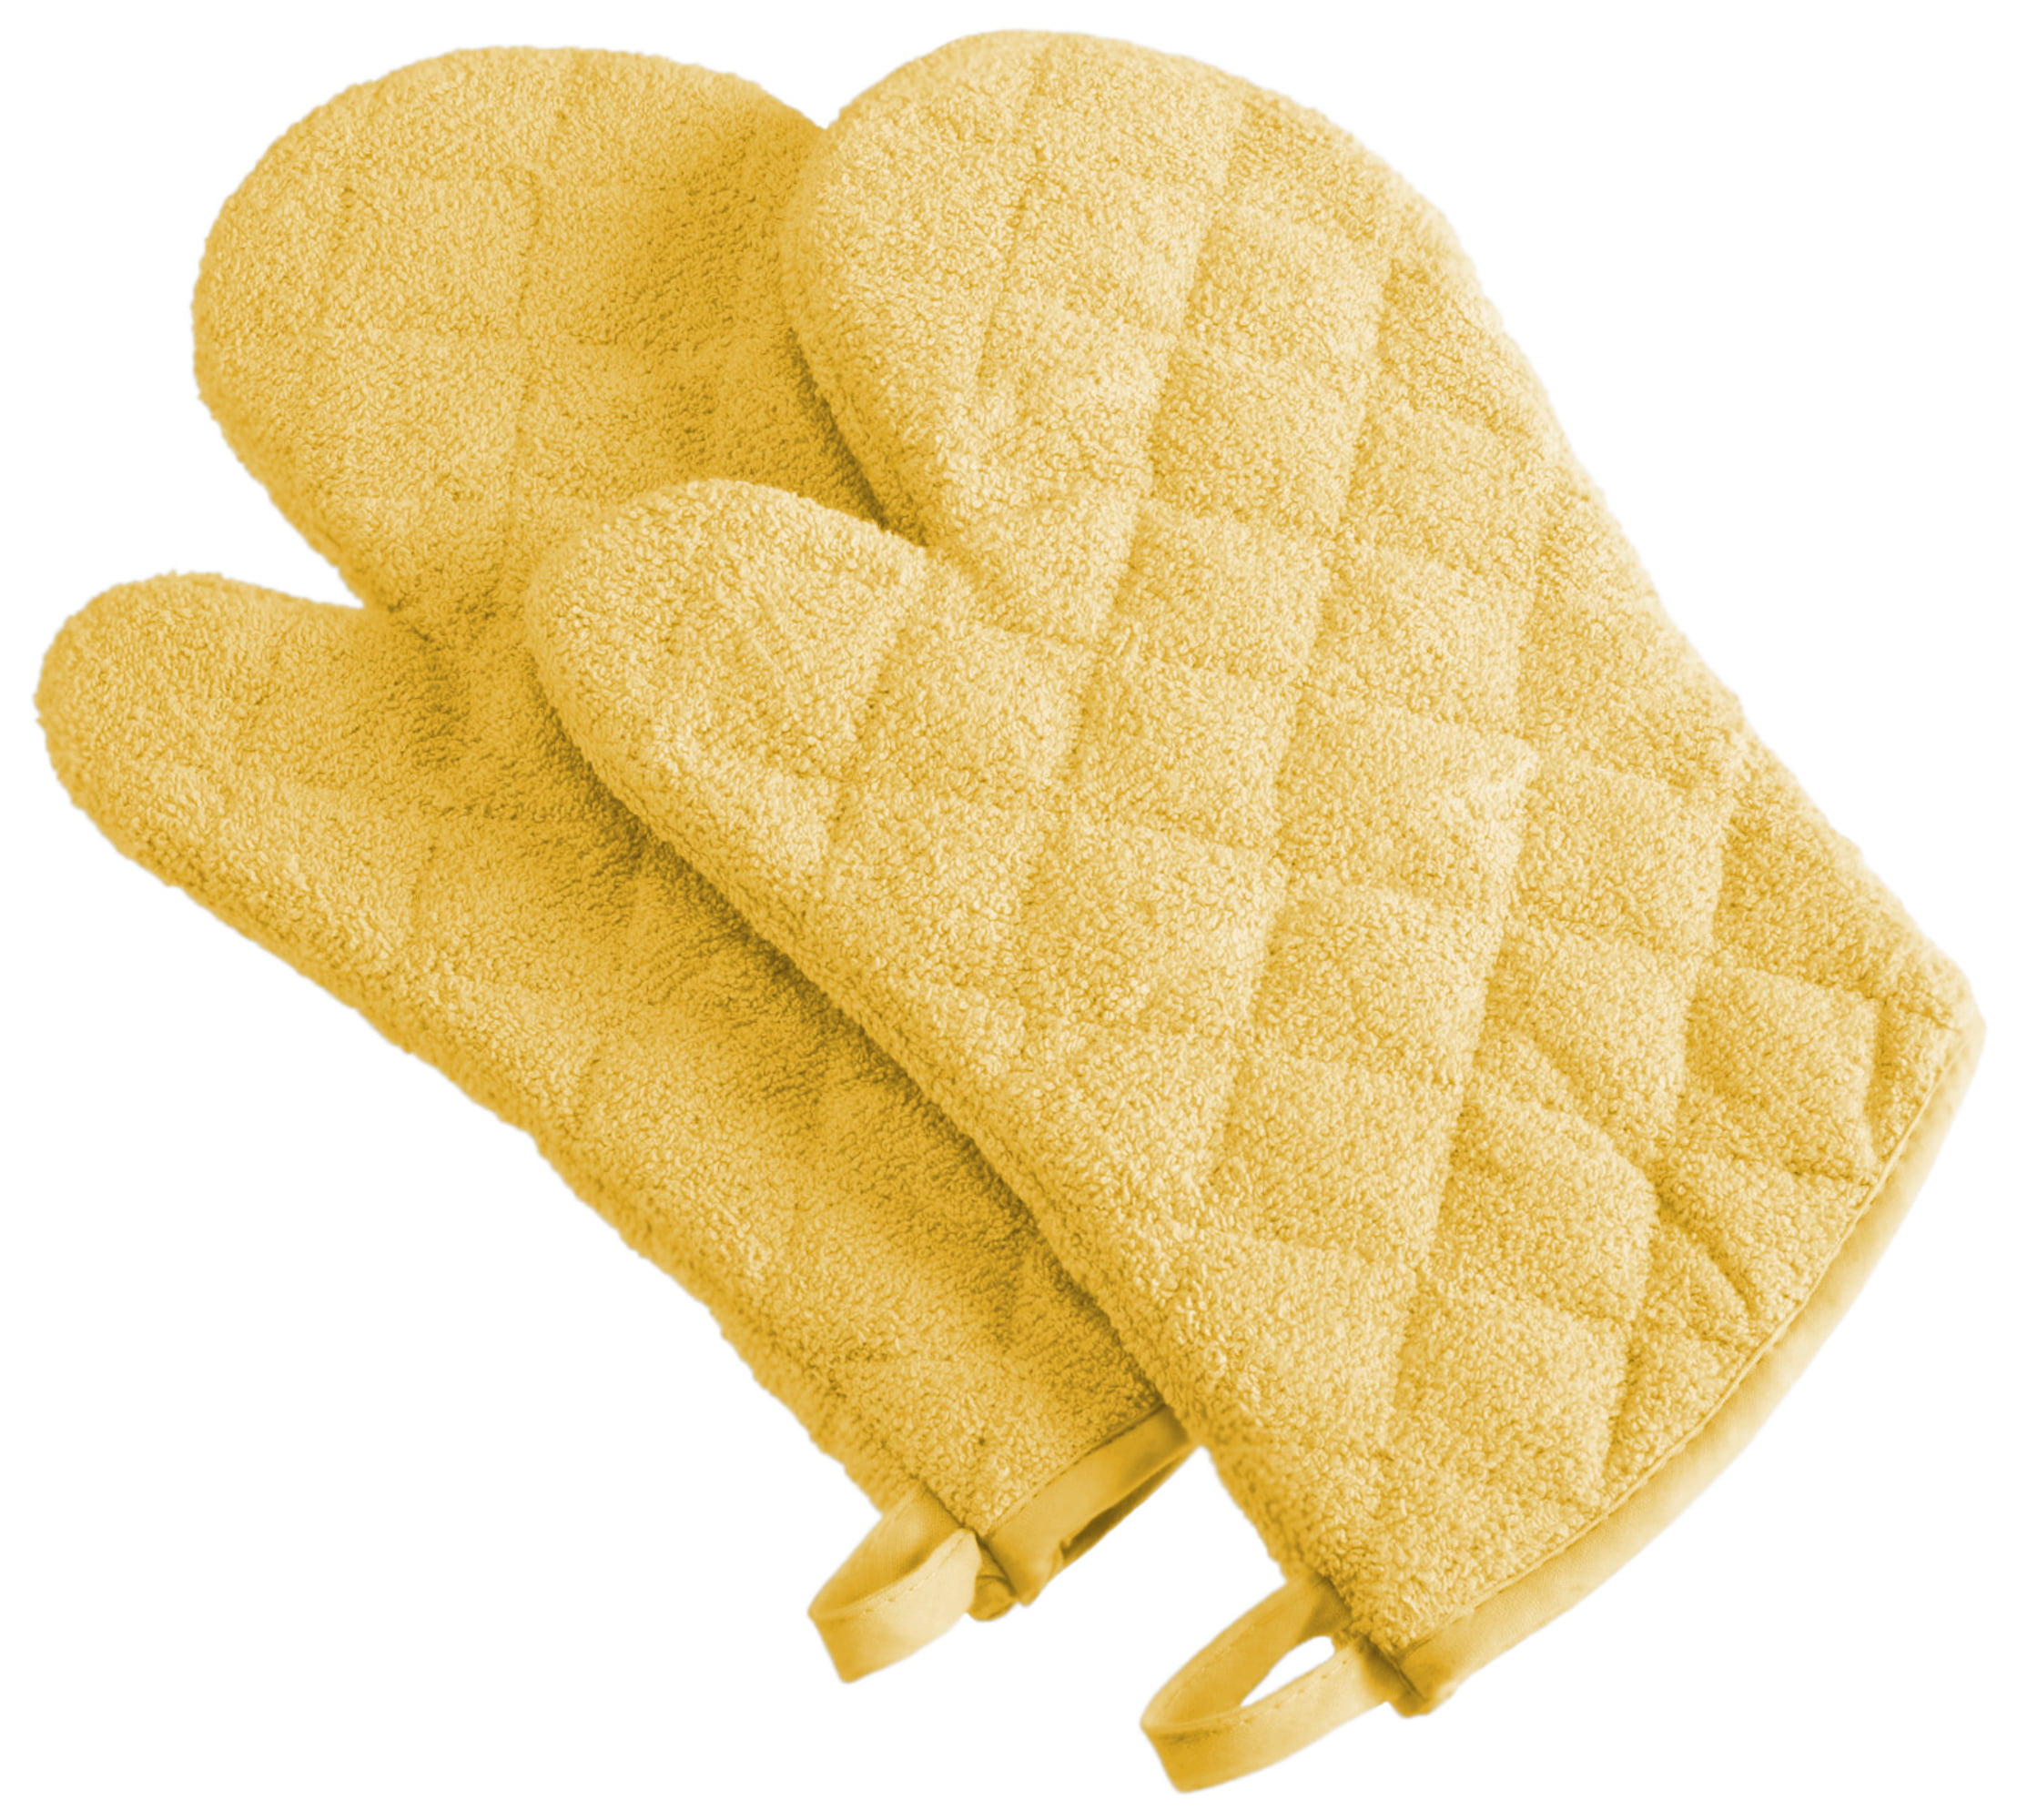 Free Shipping DII 100% Cotton Terry Oven Mitts 7 x 13" Heat Resistant Machine.. 